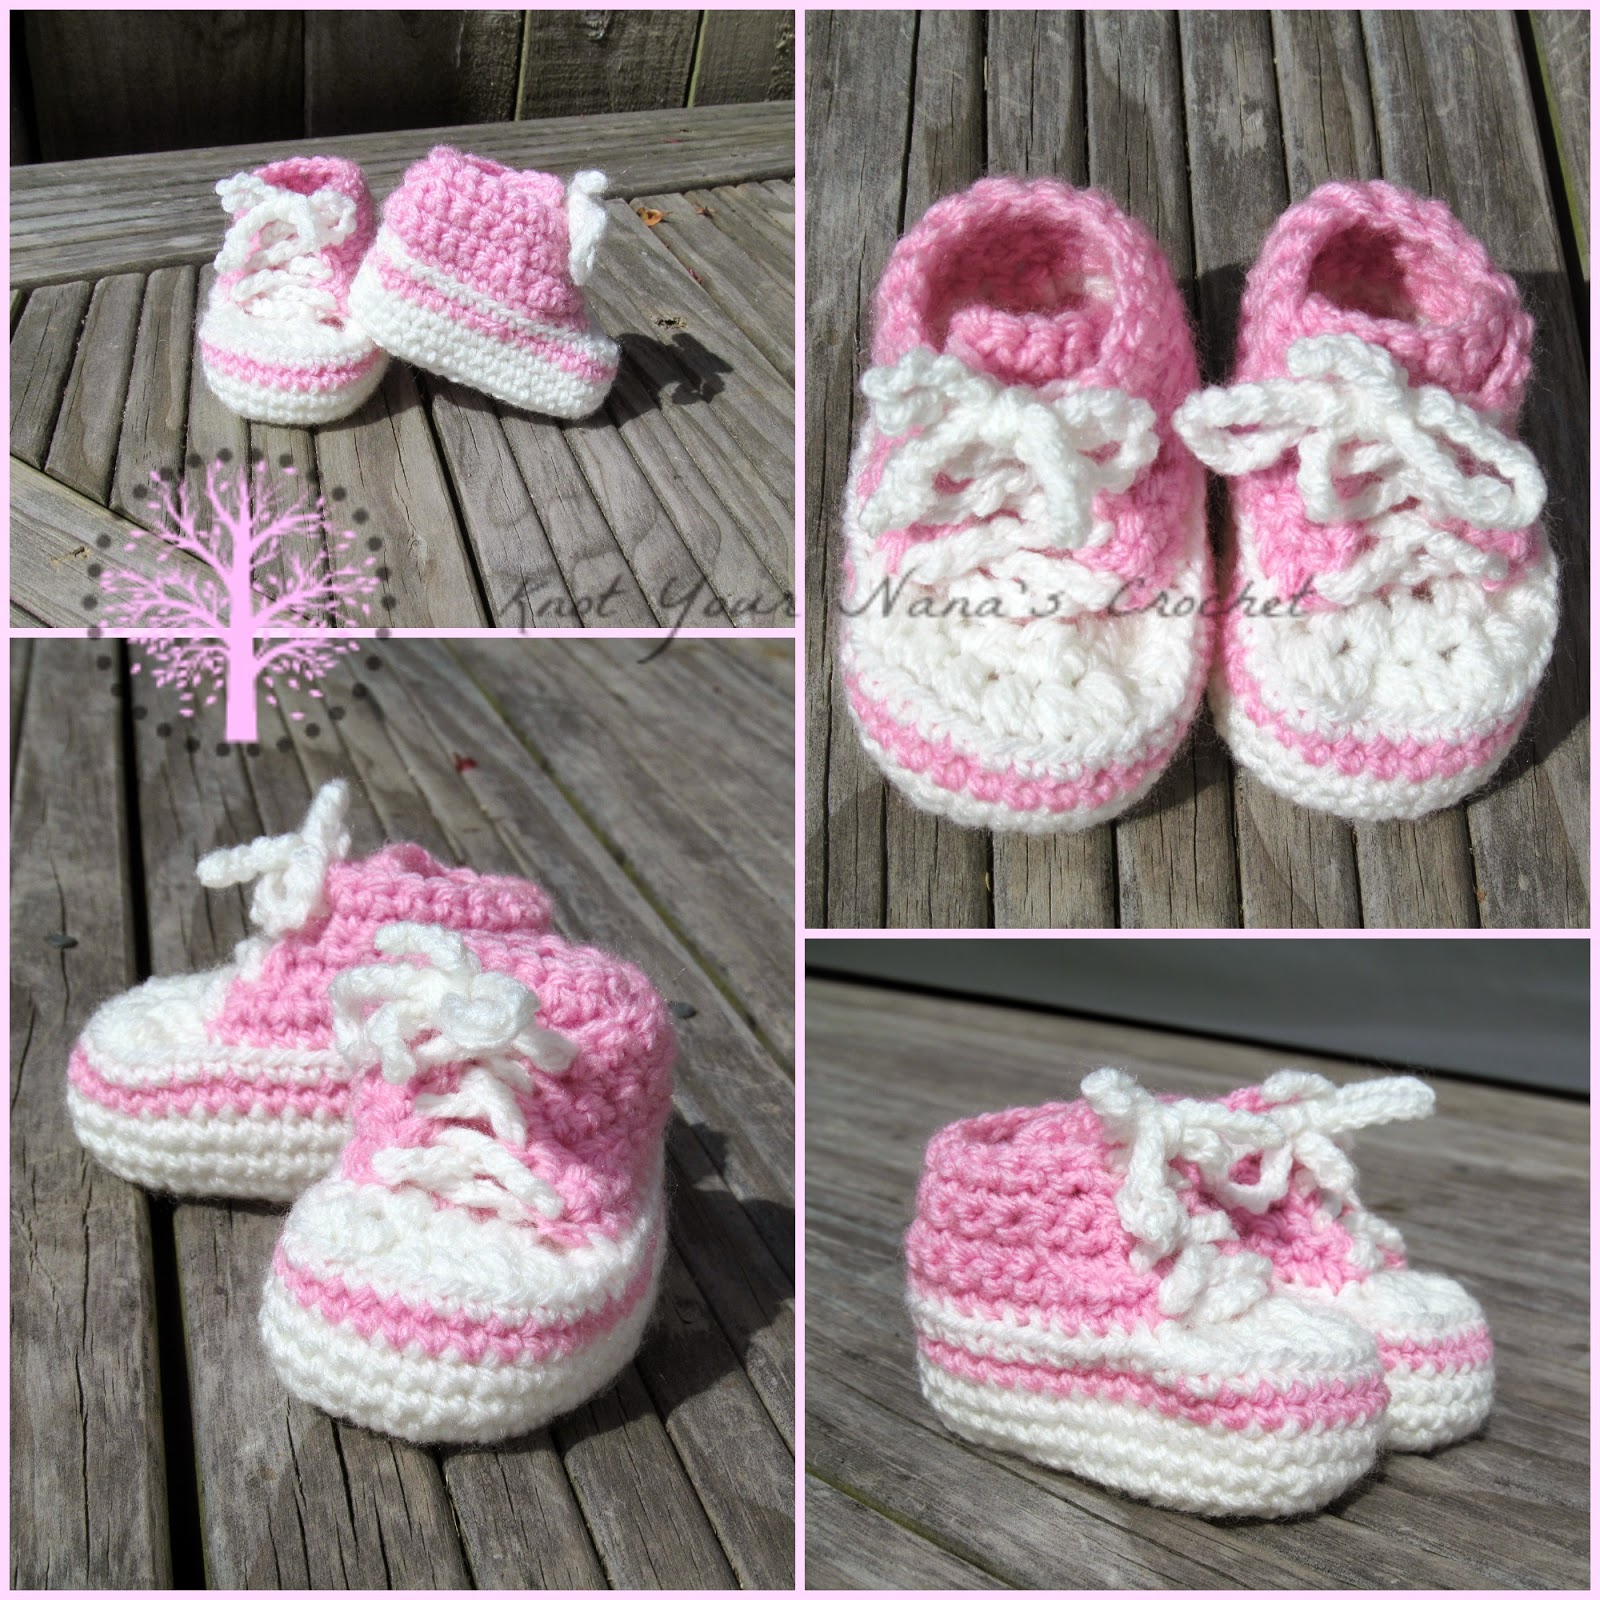 Baby Converse Crochet Pattern Knot Your Nanas Crochet Crochet Converse Newborn High Tops